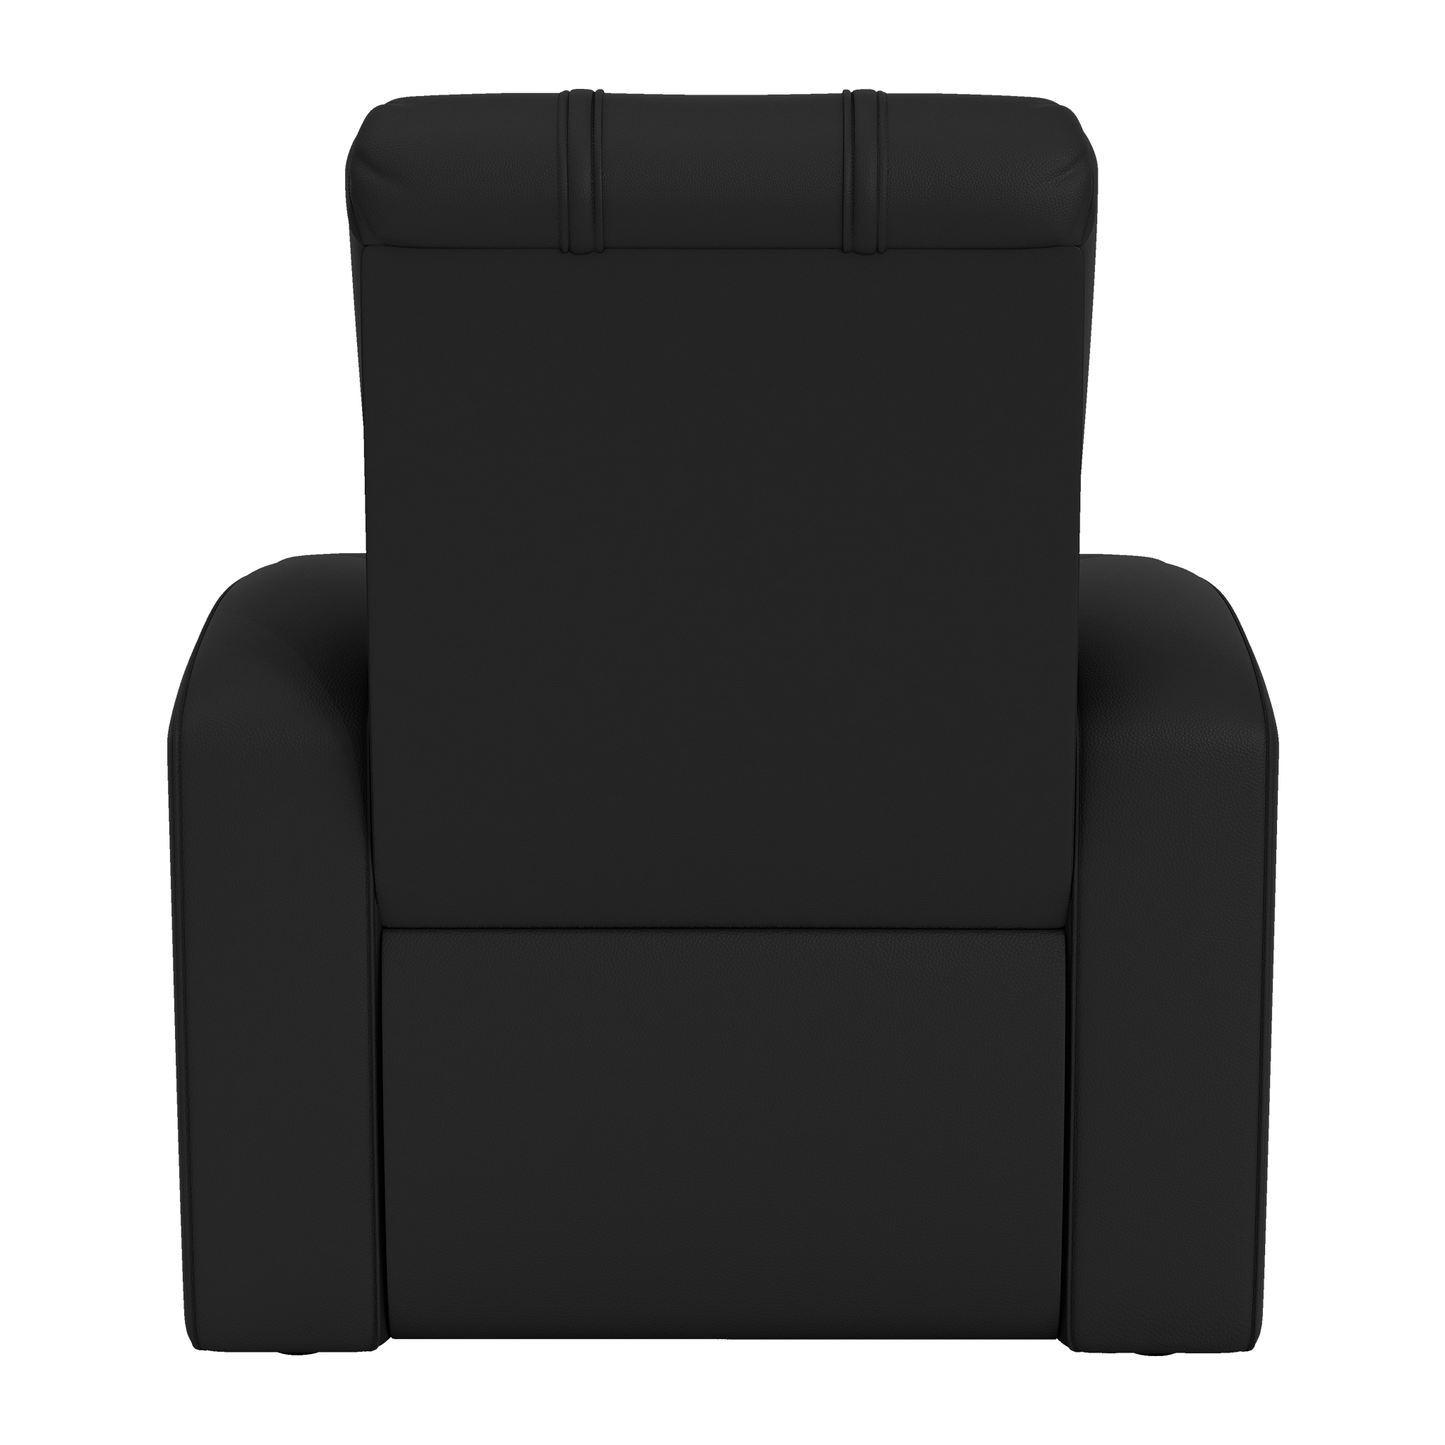 Relax Home Theater Recliner with Corvette C1 Logo